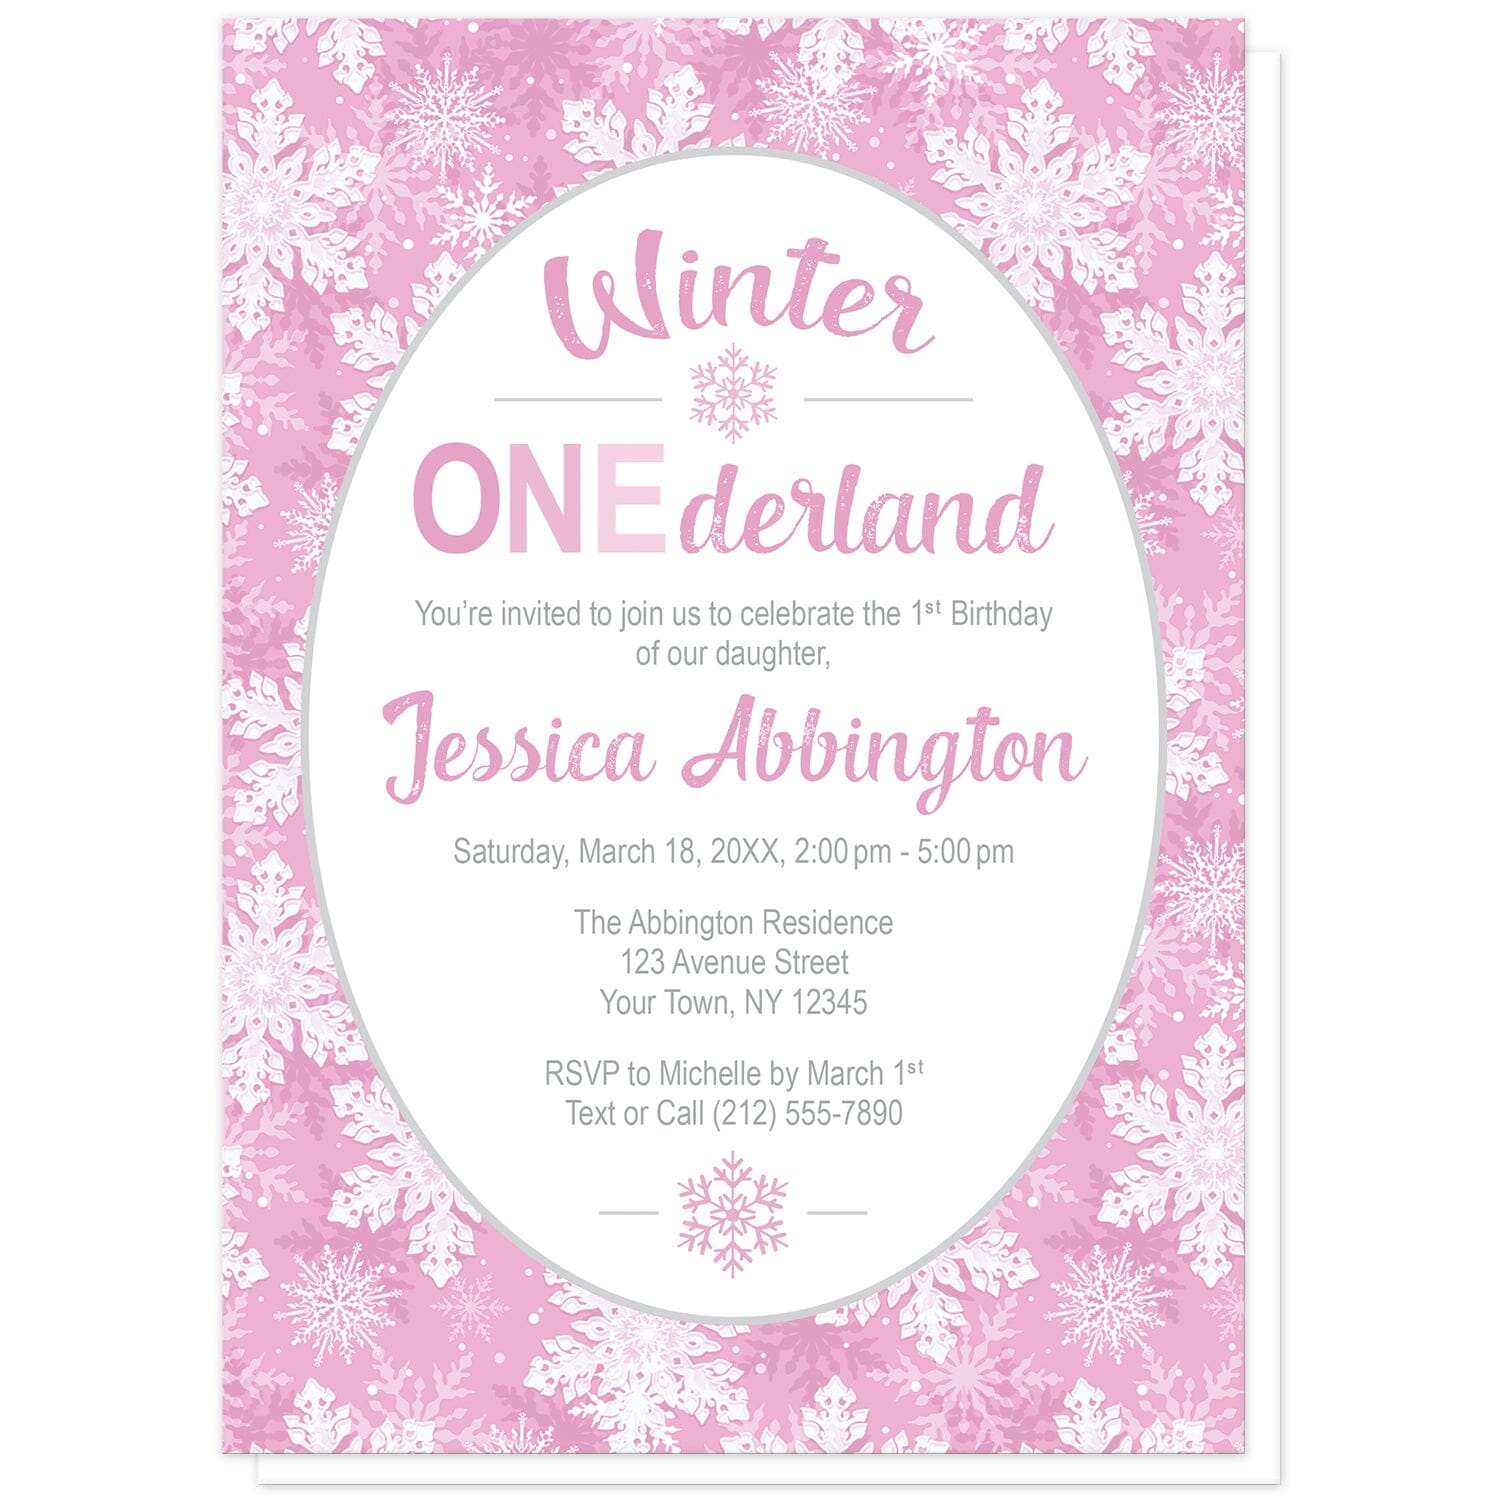 Pink Snowflake 1st Birthday Winter Onederland Invitations at Artistically Invited. Beautifully ornate pink snowflake 1st birthday Winter Onederland invitations designed with your personalized 1st birthday party details custom printed in pink and gray in a white oval frame design over a pretty pink and white snowflake pattern background.